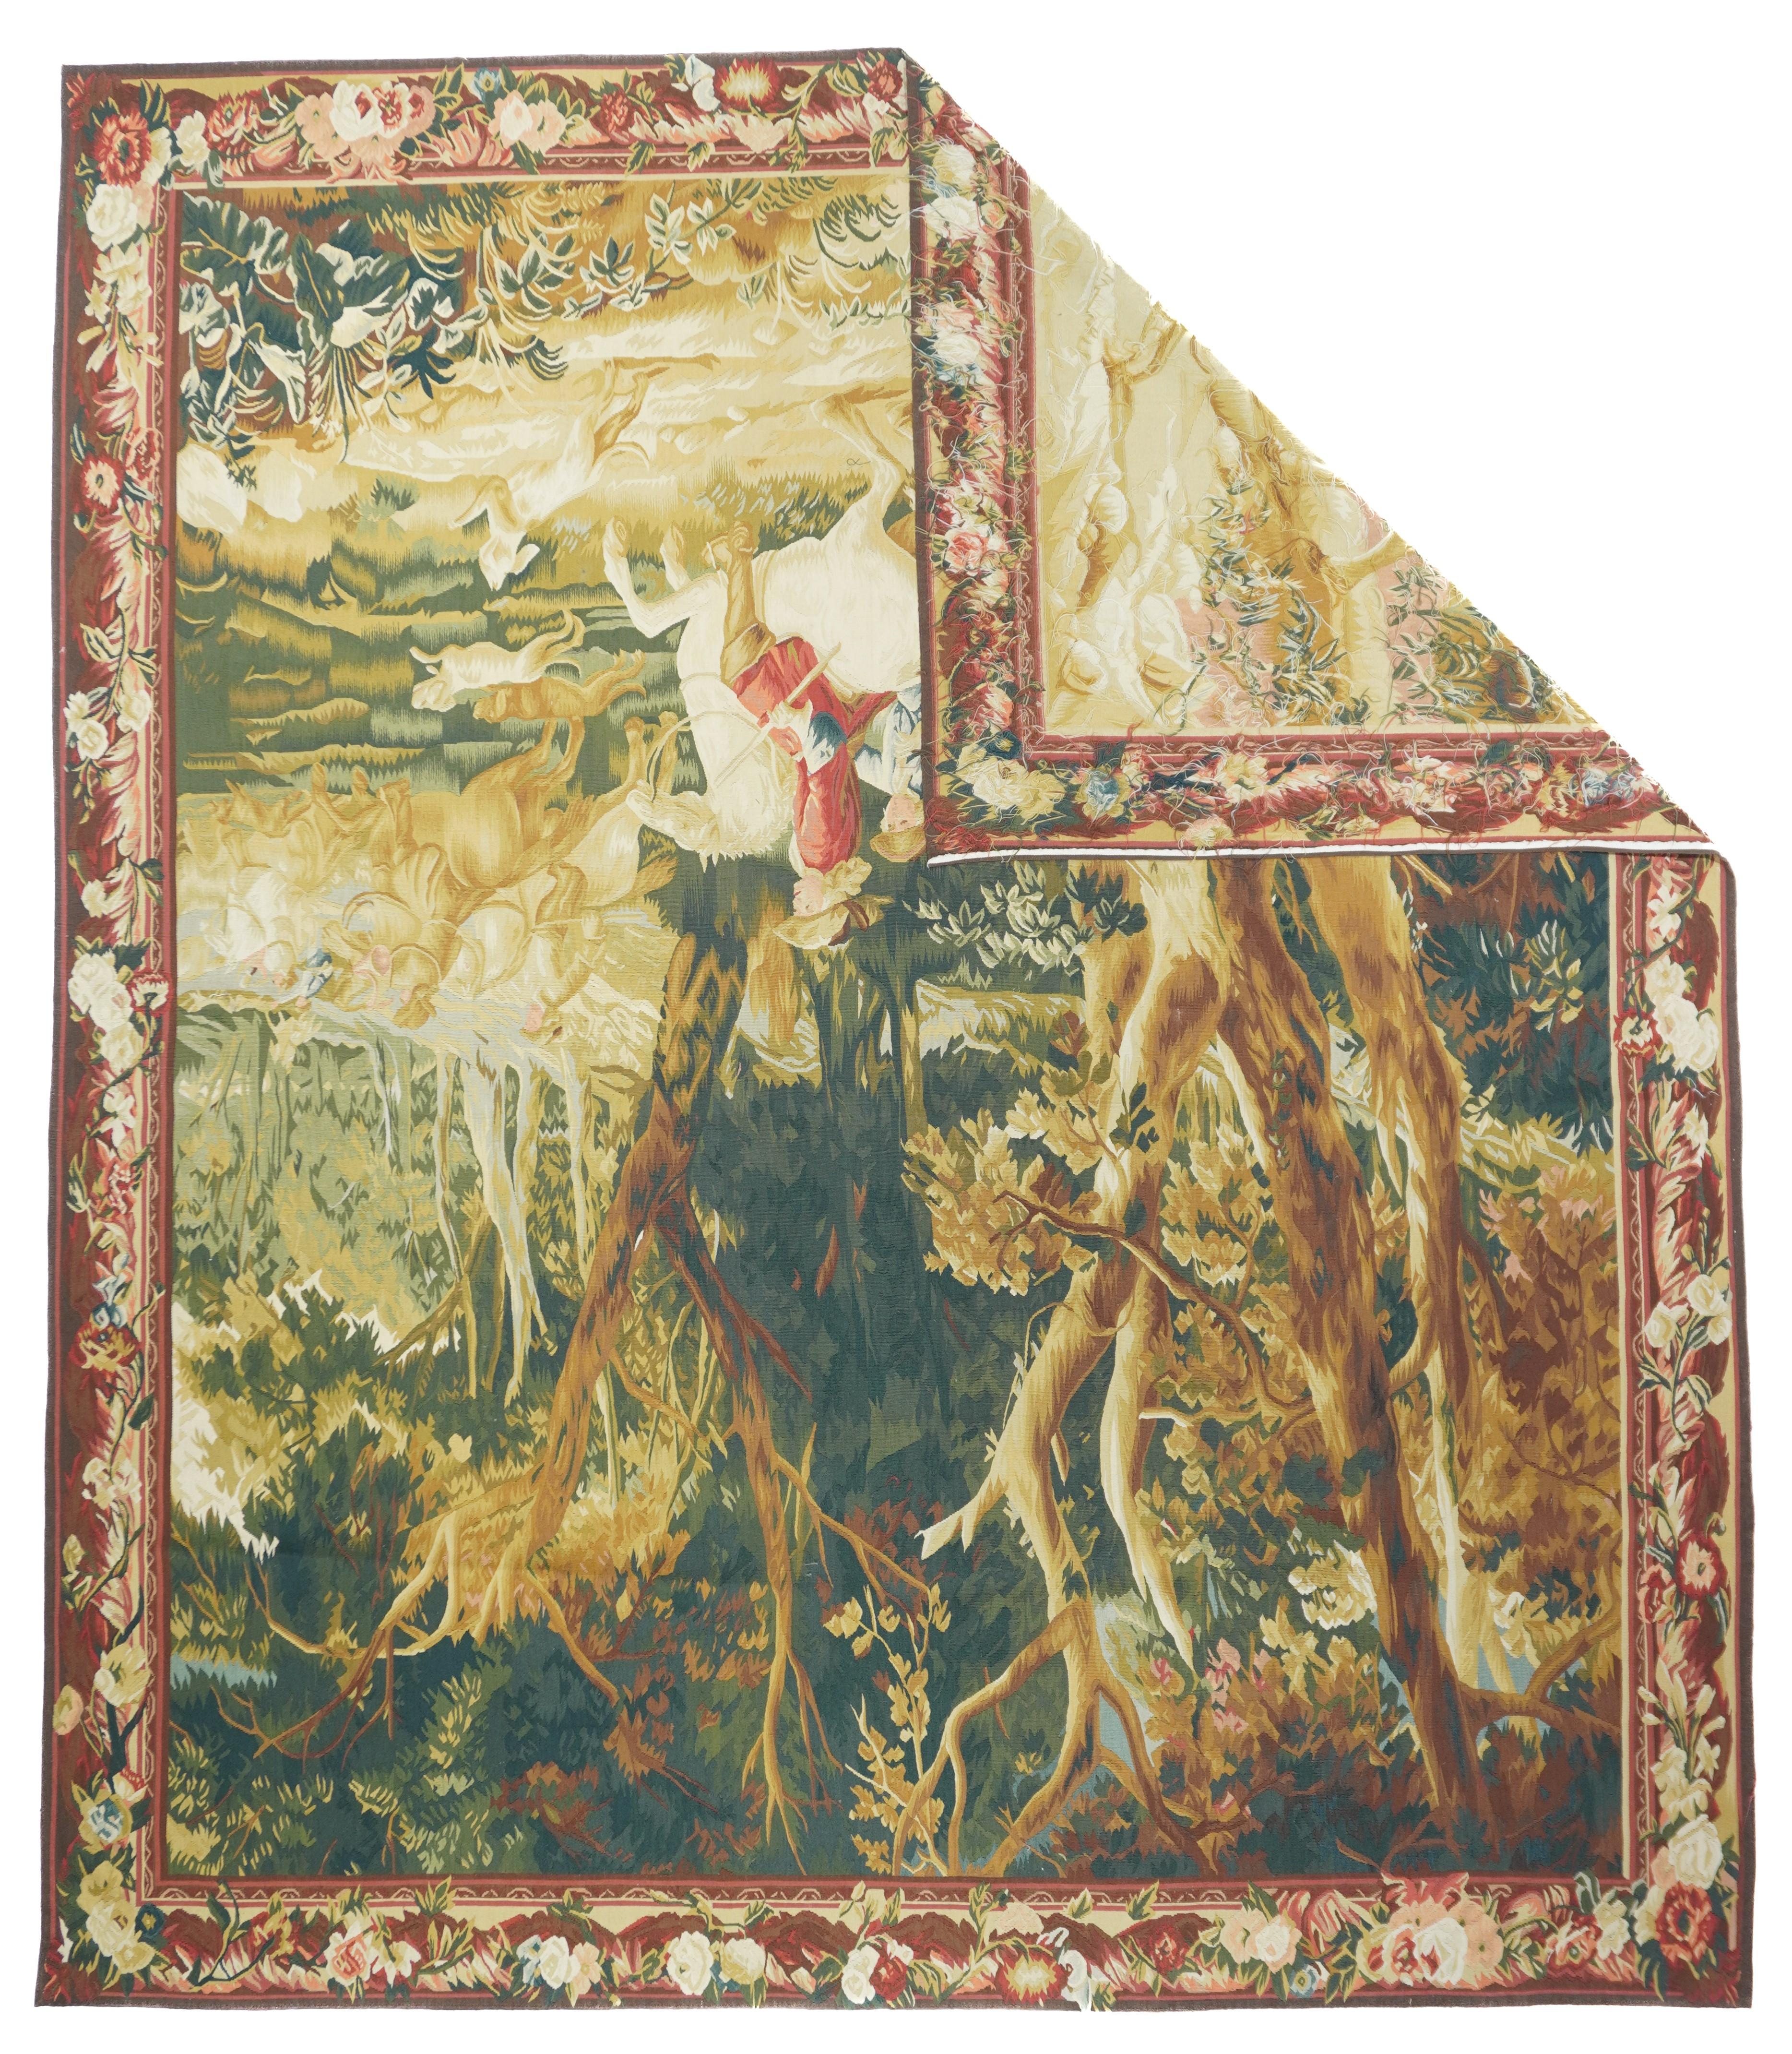 Vintage Belgium Pictorial tapestry 7.5'' x 7.7''. This tapestry almost surely originates in Brussels, the centre of Flemish tapestry weaving from the early 16th century until the 19th. Mounted and running hunters, some with muskets, and their